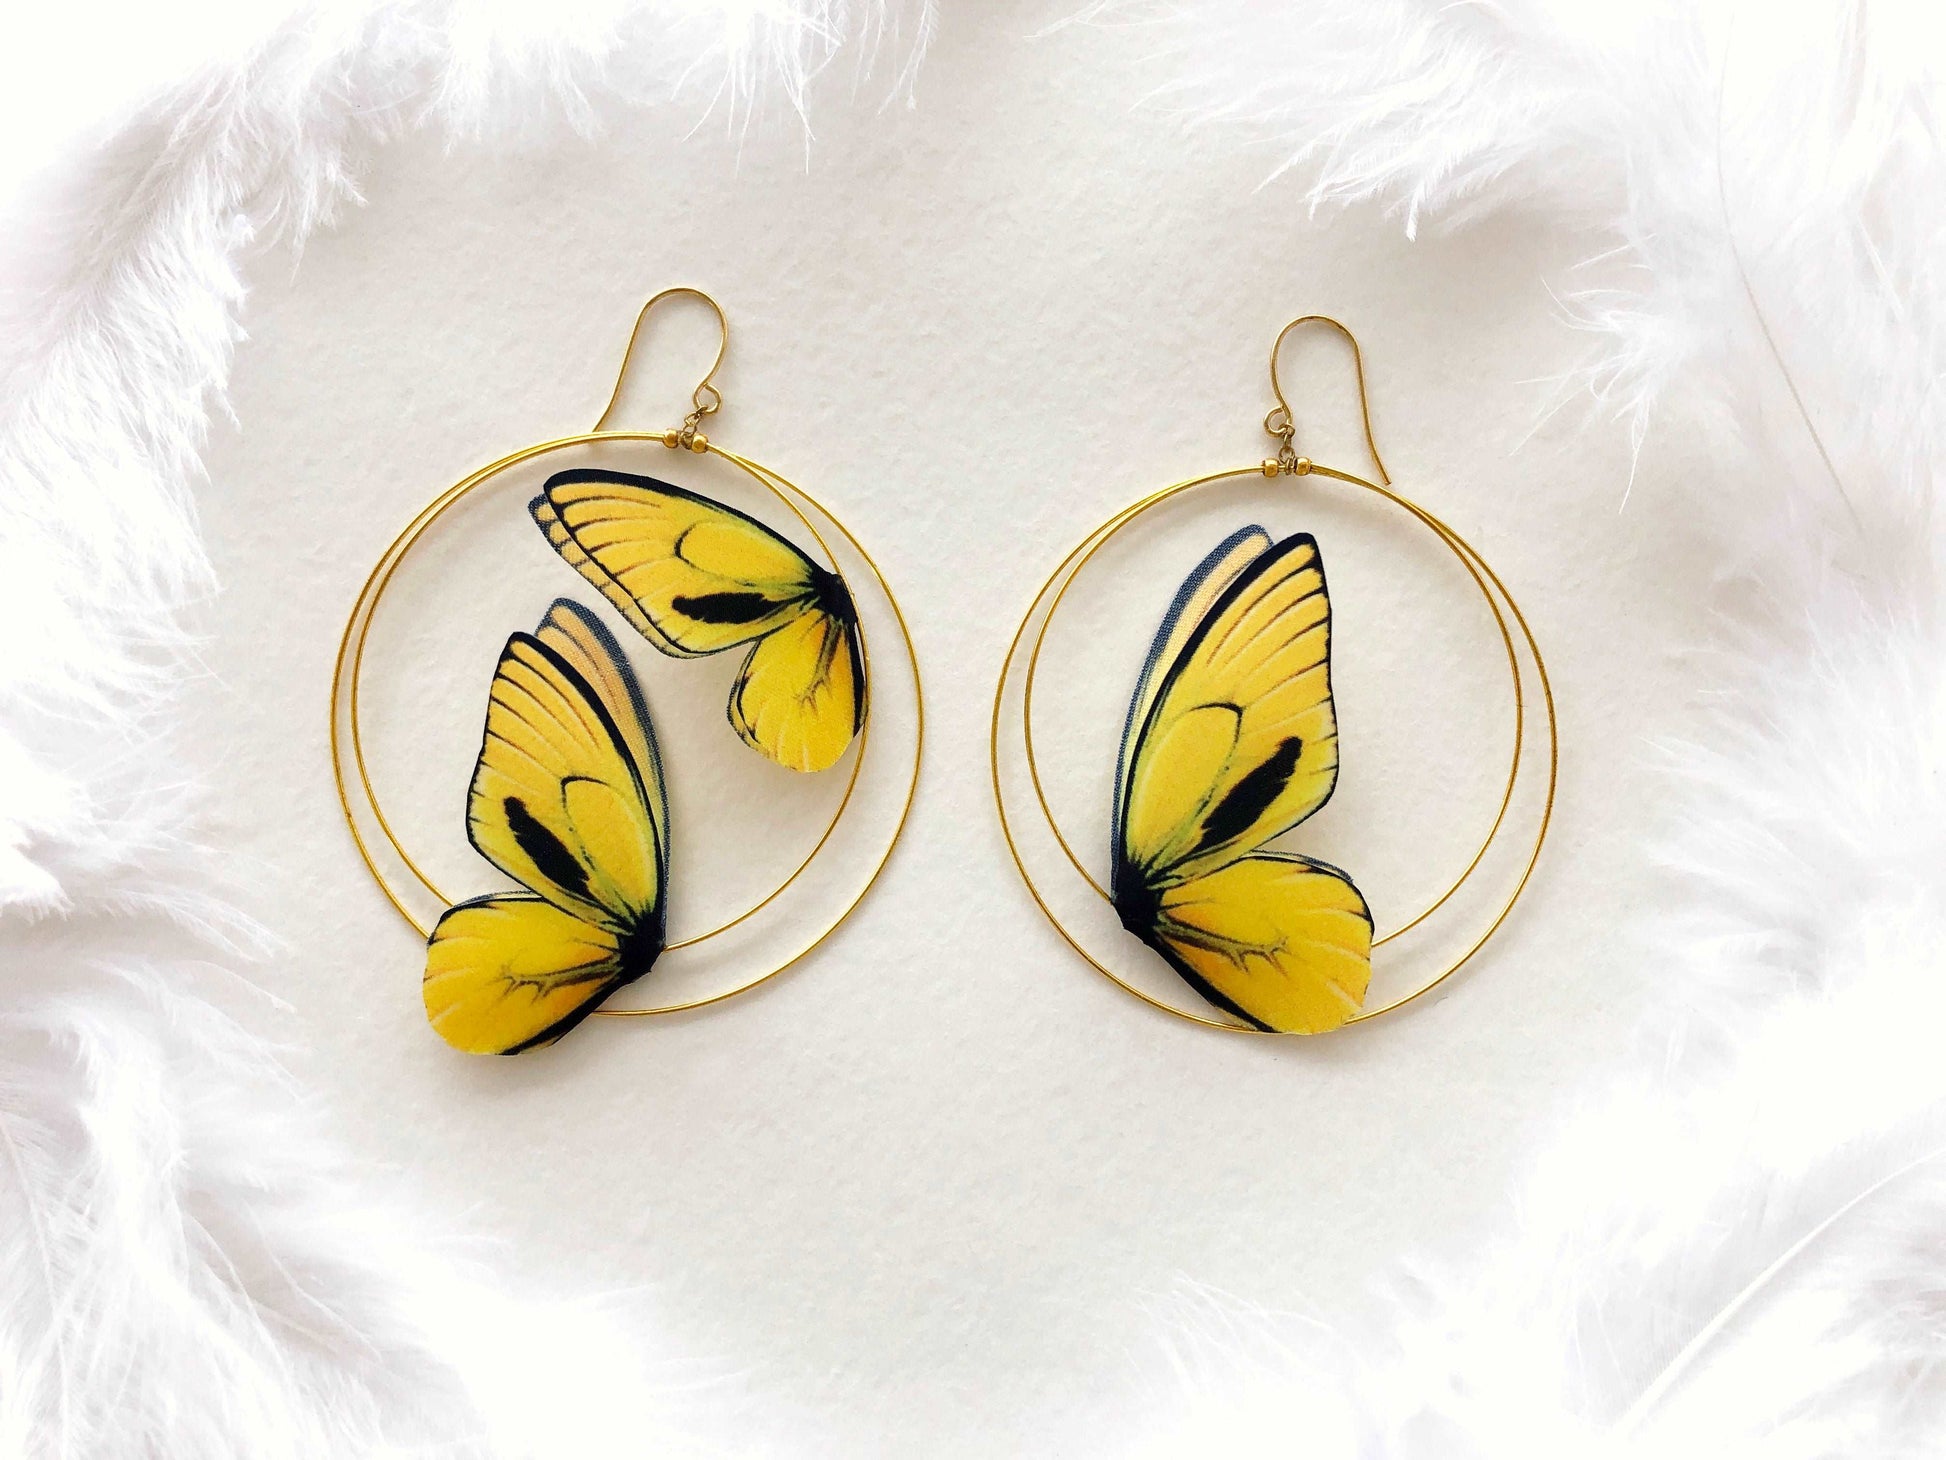 Romantic Hoop Earrings with Faux Butterflies Hand Made in Boho Style, Giant Hoop Earring Perfect Gift for Butterfly Lover